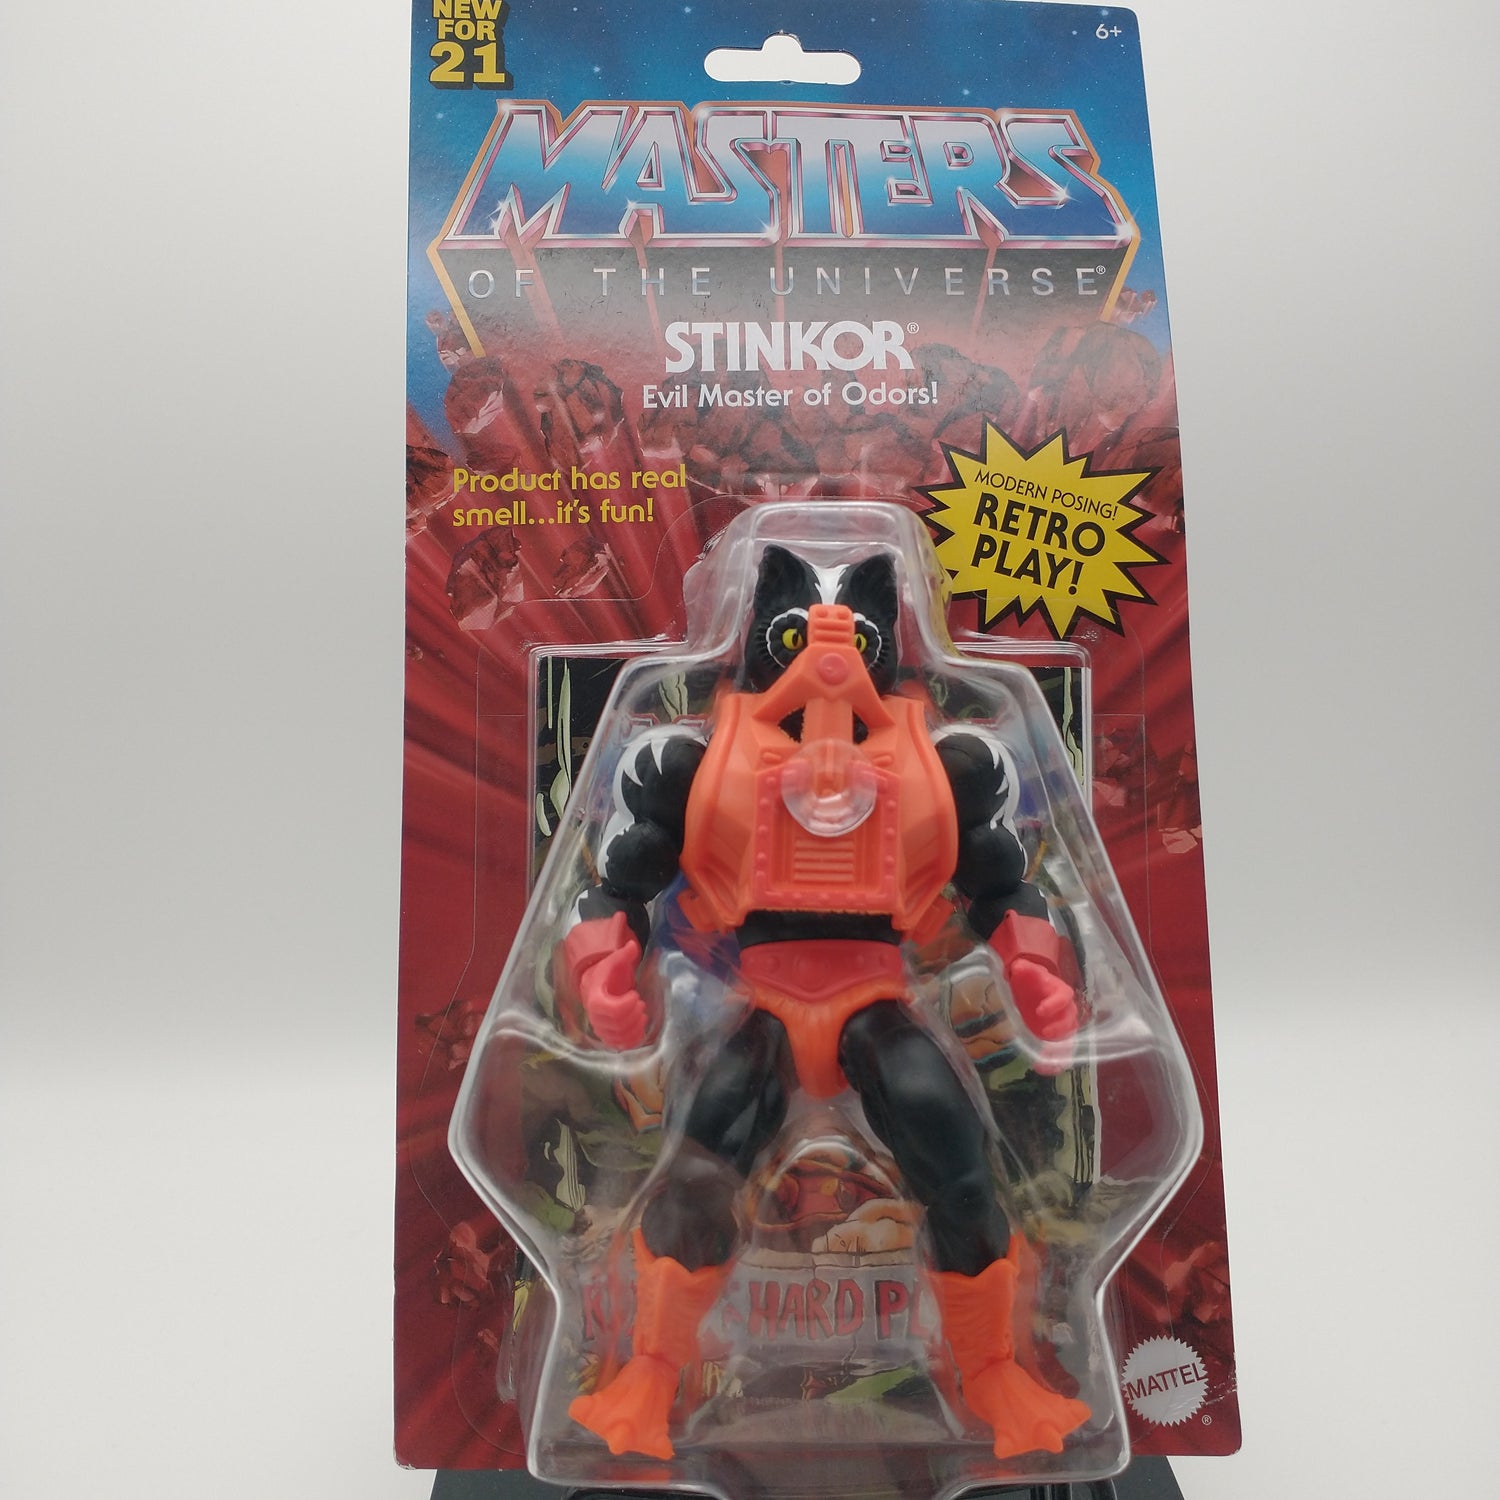 The front of the box and bubble. The bubble is sealed, the action figure inside is a humanoid with the fur and stripes of a skunk. He's wearing orange boots, red gloves, and a chestpiece that covers the bottom part of this face. There's text on the card that reads "Product has real smell...it's fun!"